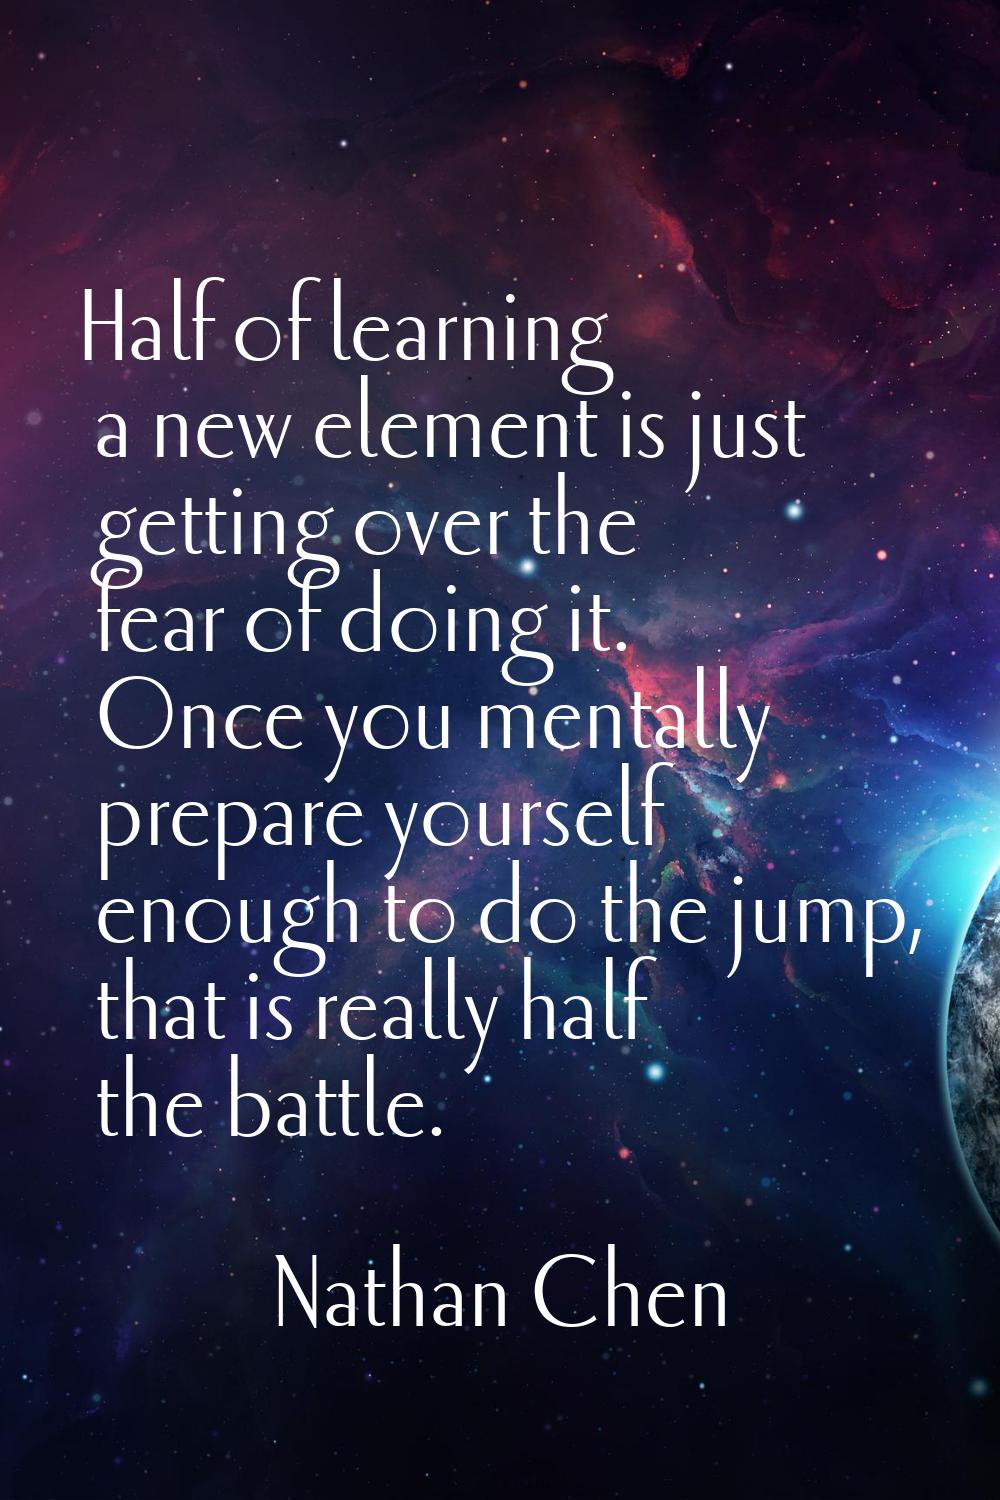 Half of learning a new element is just getting over the fear of doing it. Once you mentally prepare